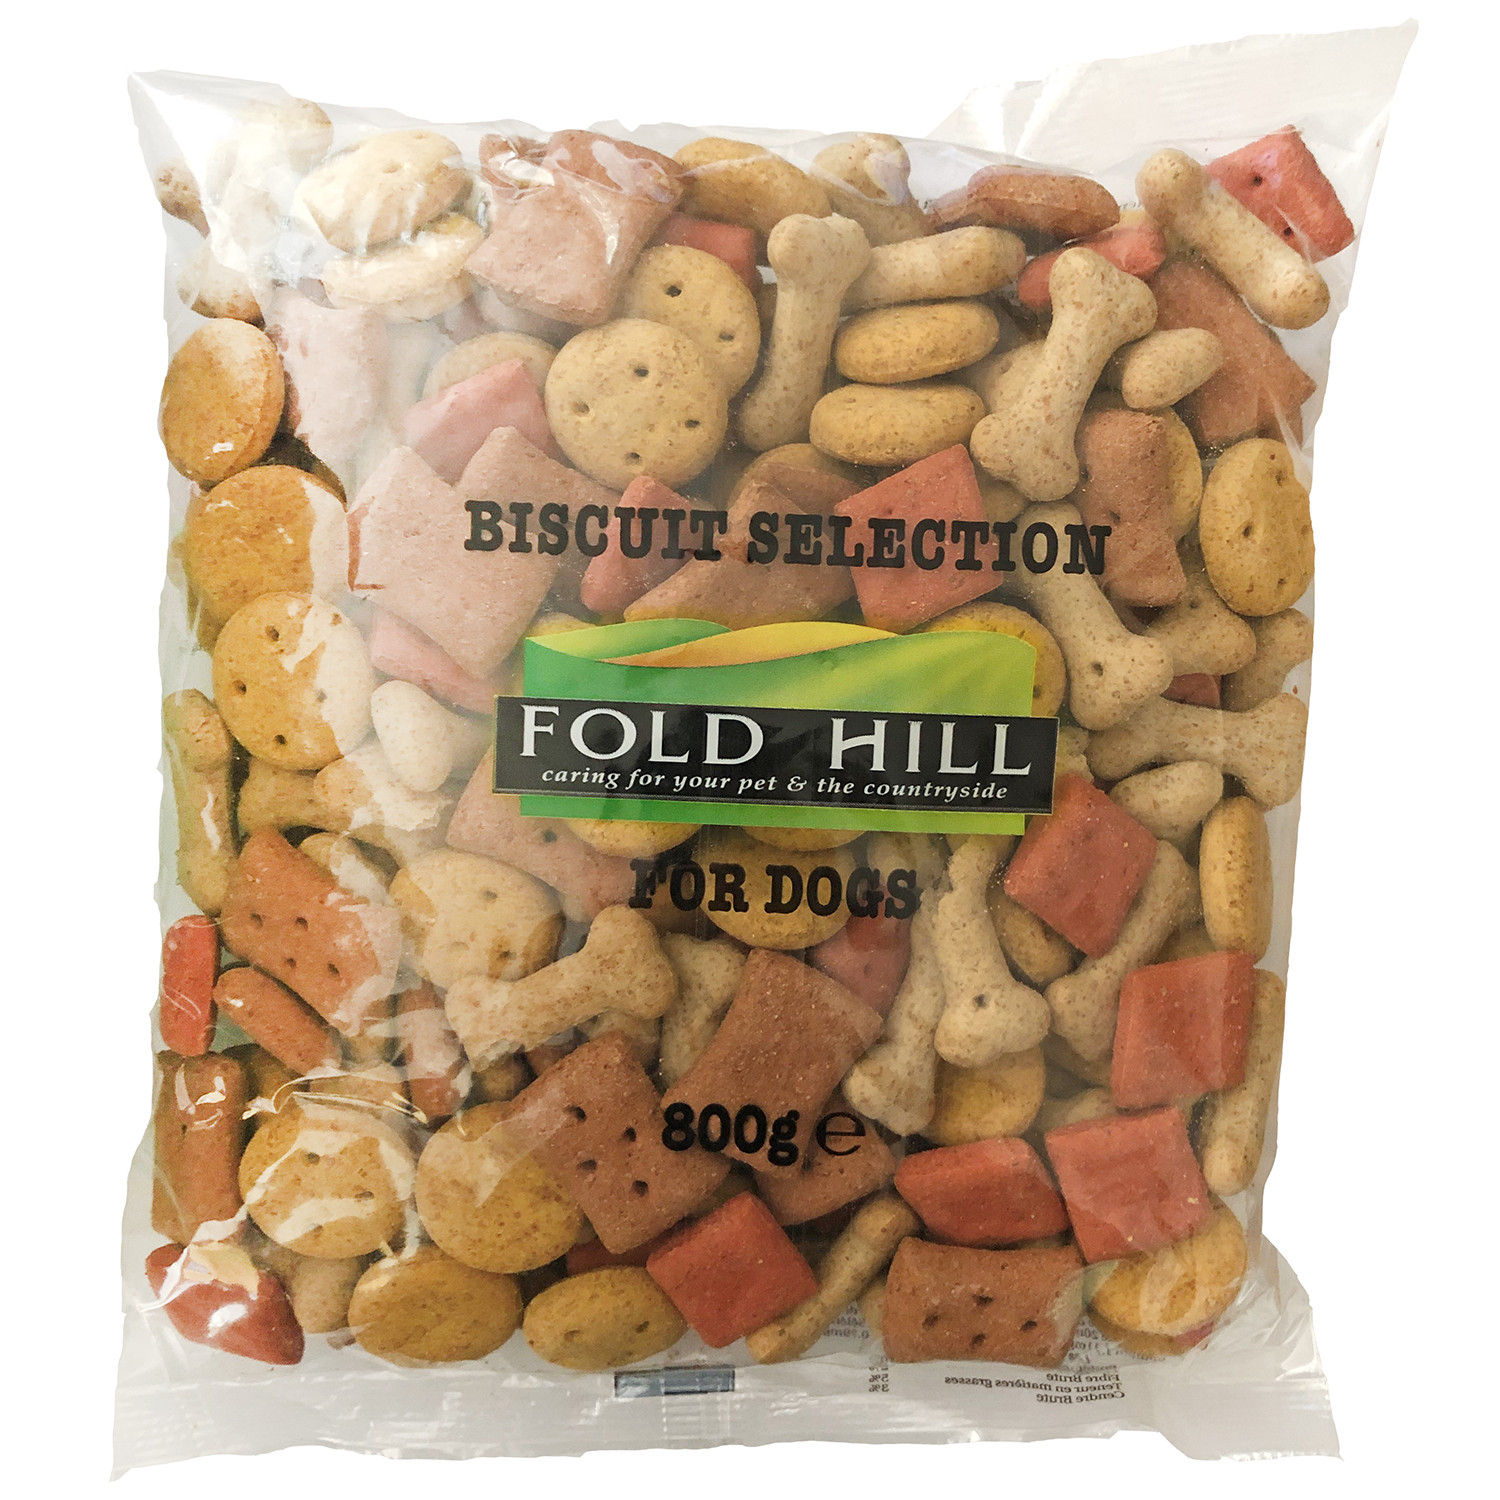 Fold Hill Biscuit Selection Dog Treats 800g Image